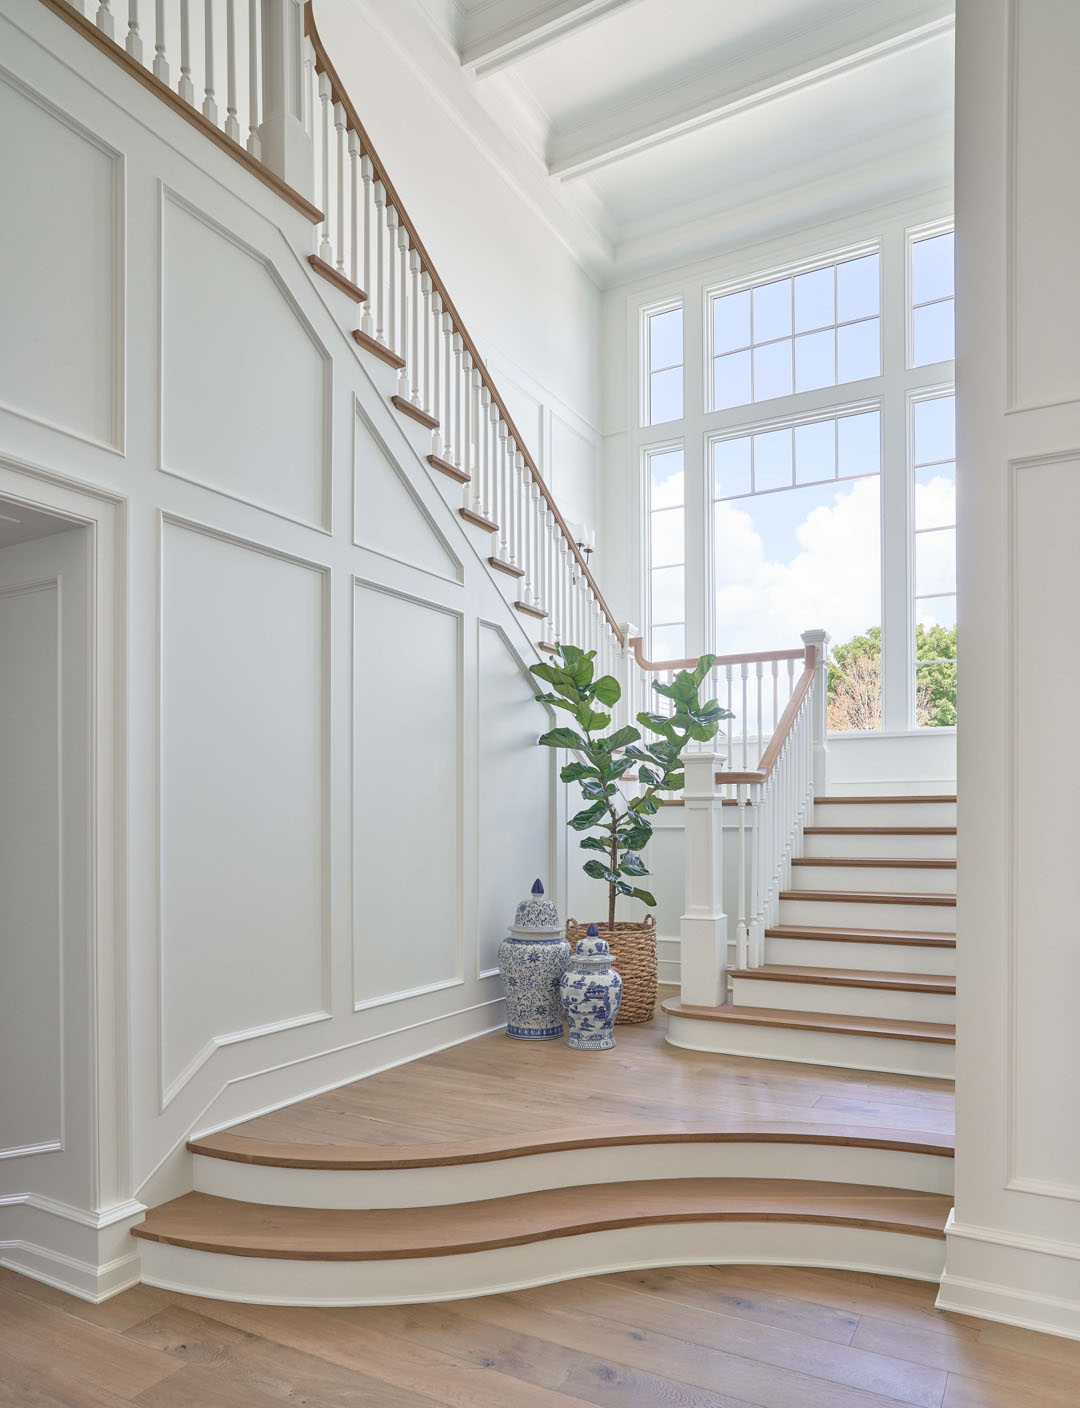 Elegant Staircase with White Wood Ceiling and Wall Paneling